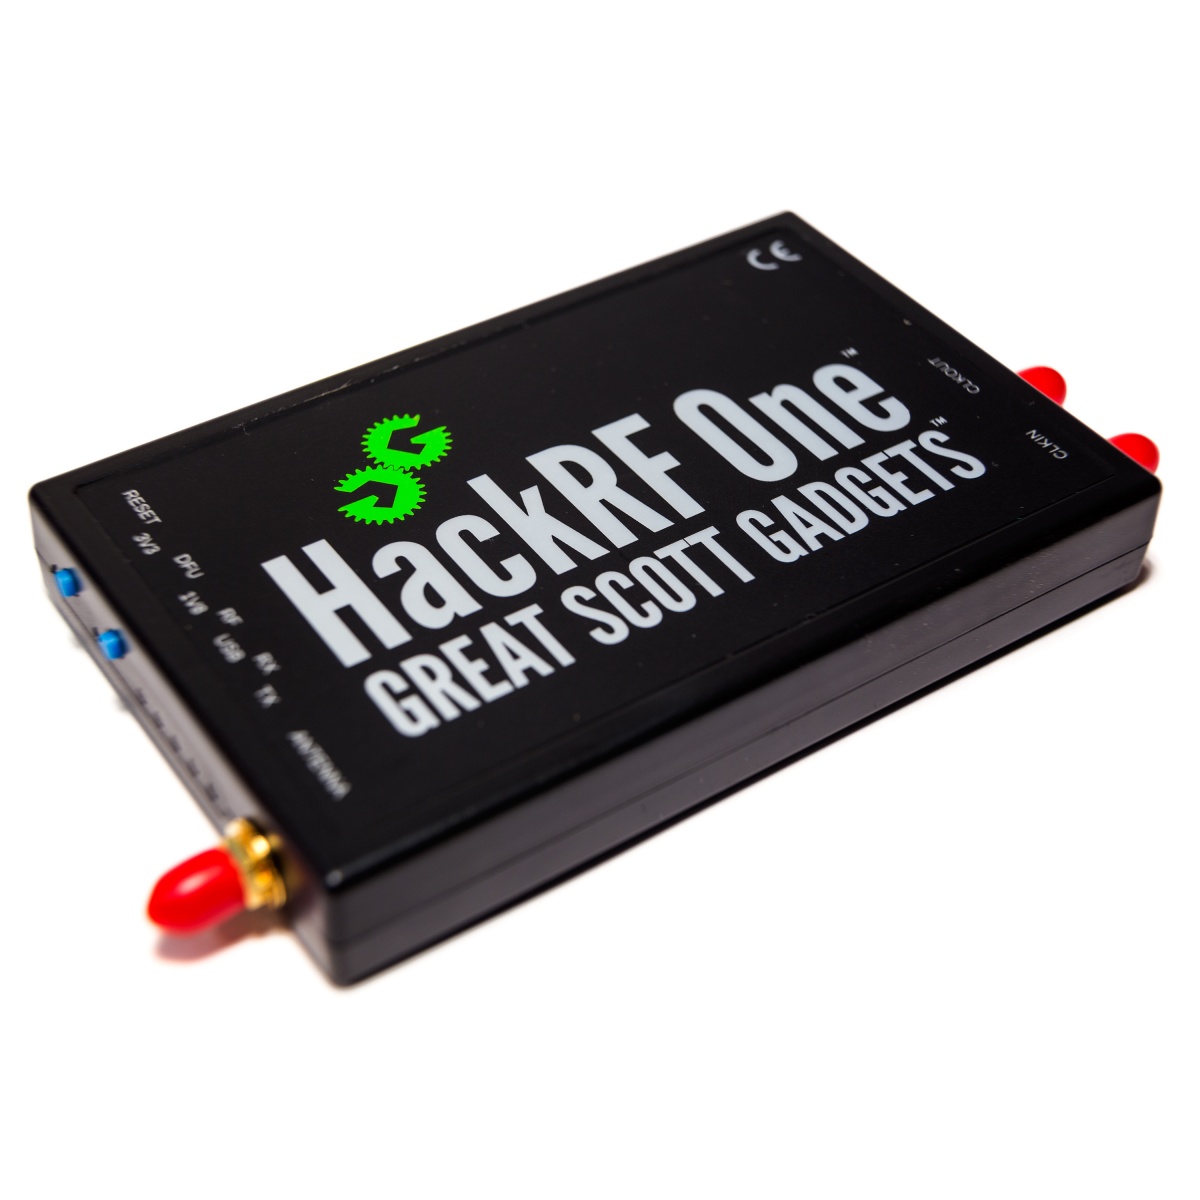  Nooelec HackRF One Software Defined Radio (SDR) & ANT500  Antenna Set. Capable of Receiving All Modes in HF, VHF & UHF Bands.  Includes SDR with 1MHz-6GHz Frequency Range & 20MHz Bandwidth